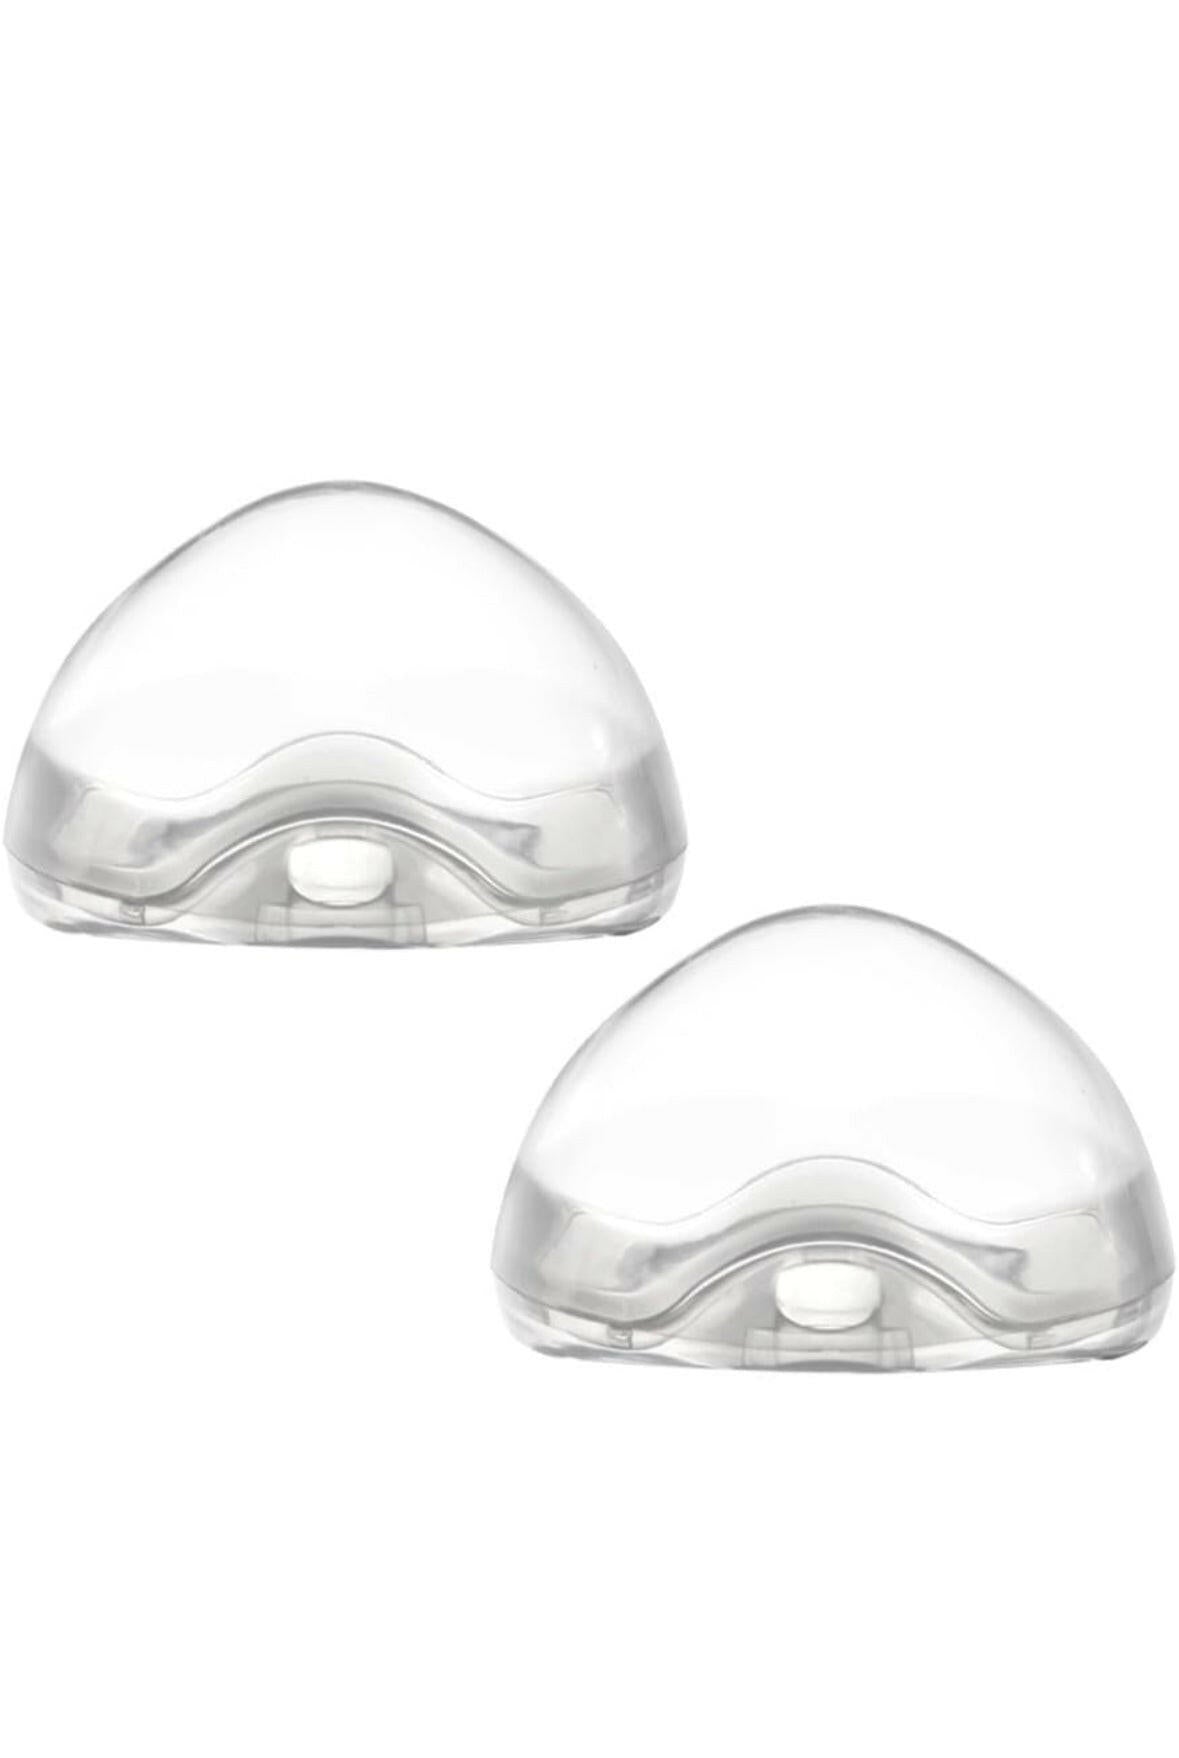 Accmor Pacifier Case, Pacifier Holder Case, Pacifier Container for Travel, BPA Free, Transparent, 2 Pack.